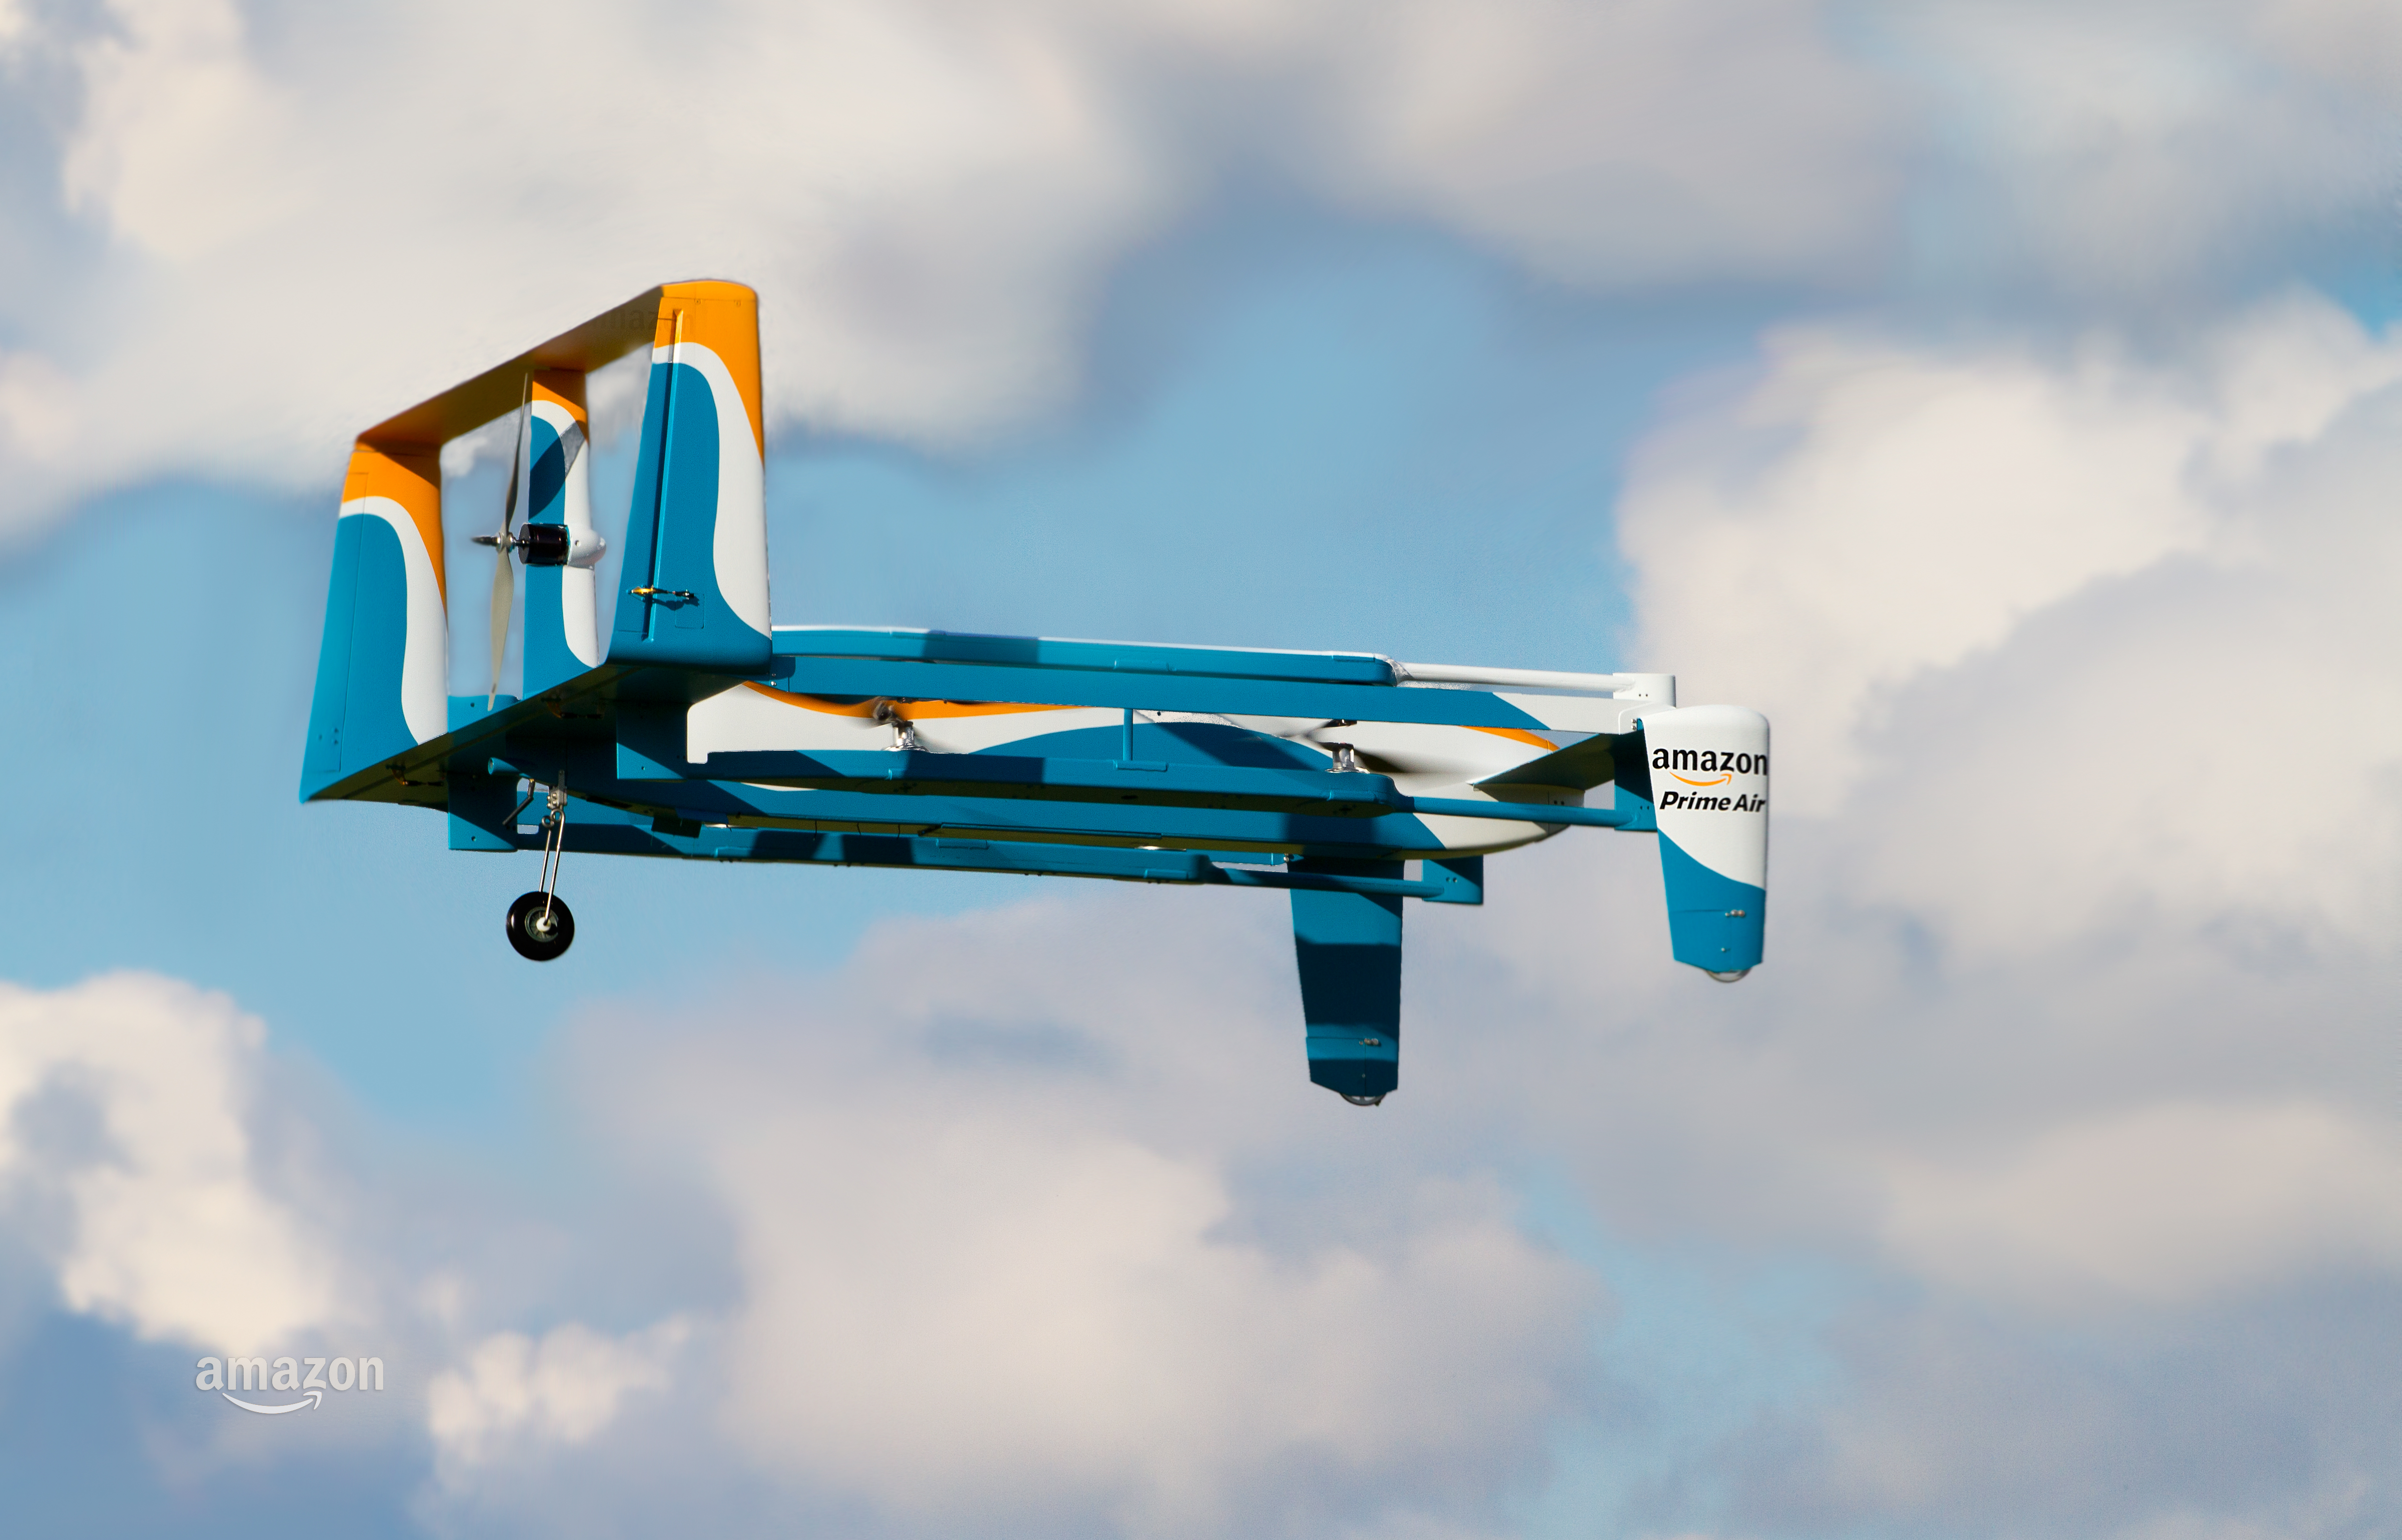 Amazon Testing “PrimeAir” Drone Delivery In UK